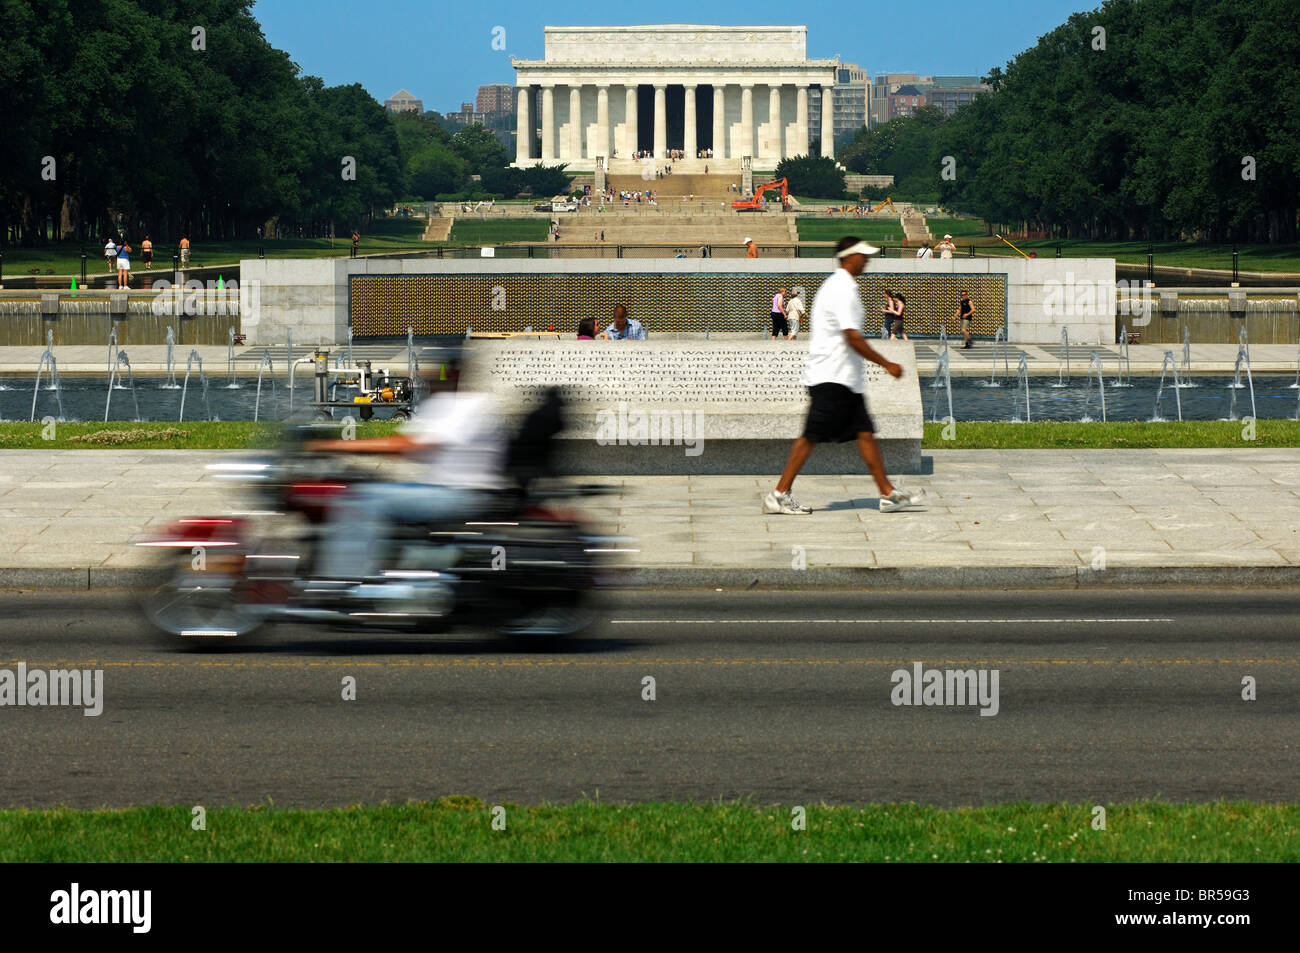 Road traffic in front of the Lincoln Memorial at the West end of the National Mall, Washington D.C., USA, Stock Photo